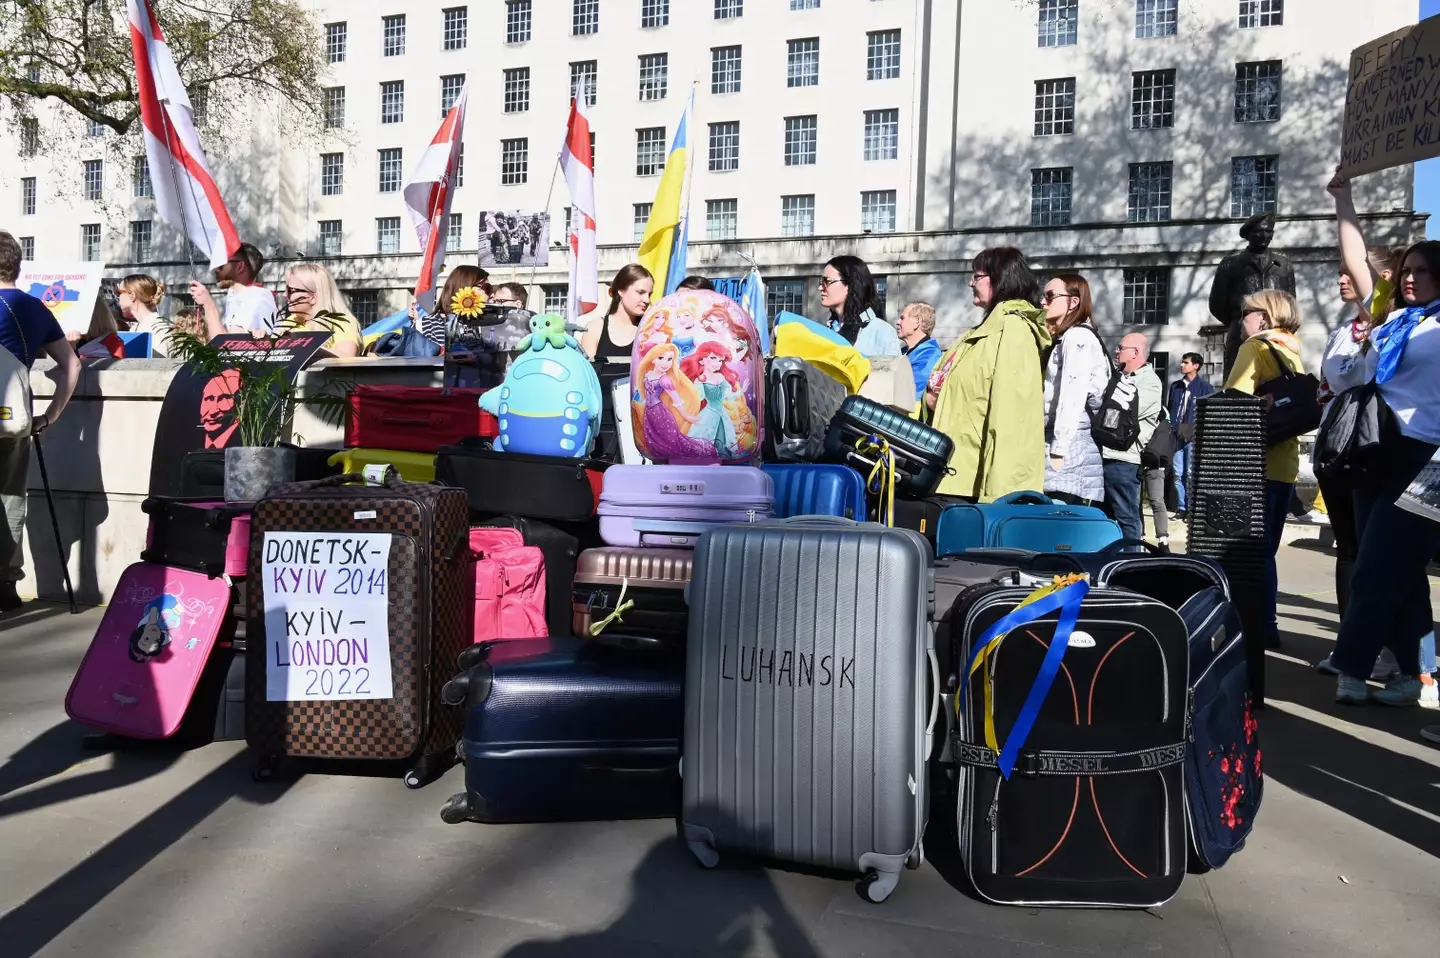 The UK announced it would open its doors to around 200,000 Ukrainian refugees.